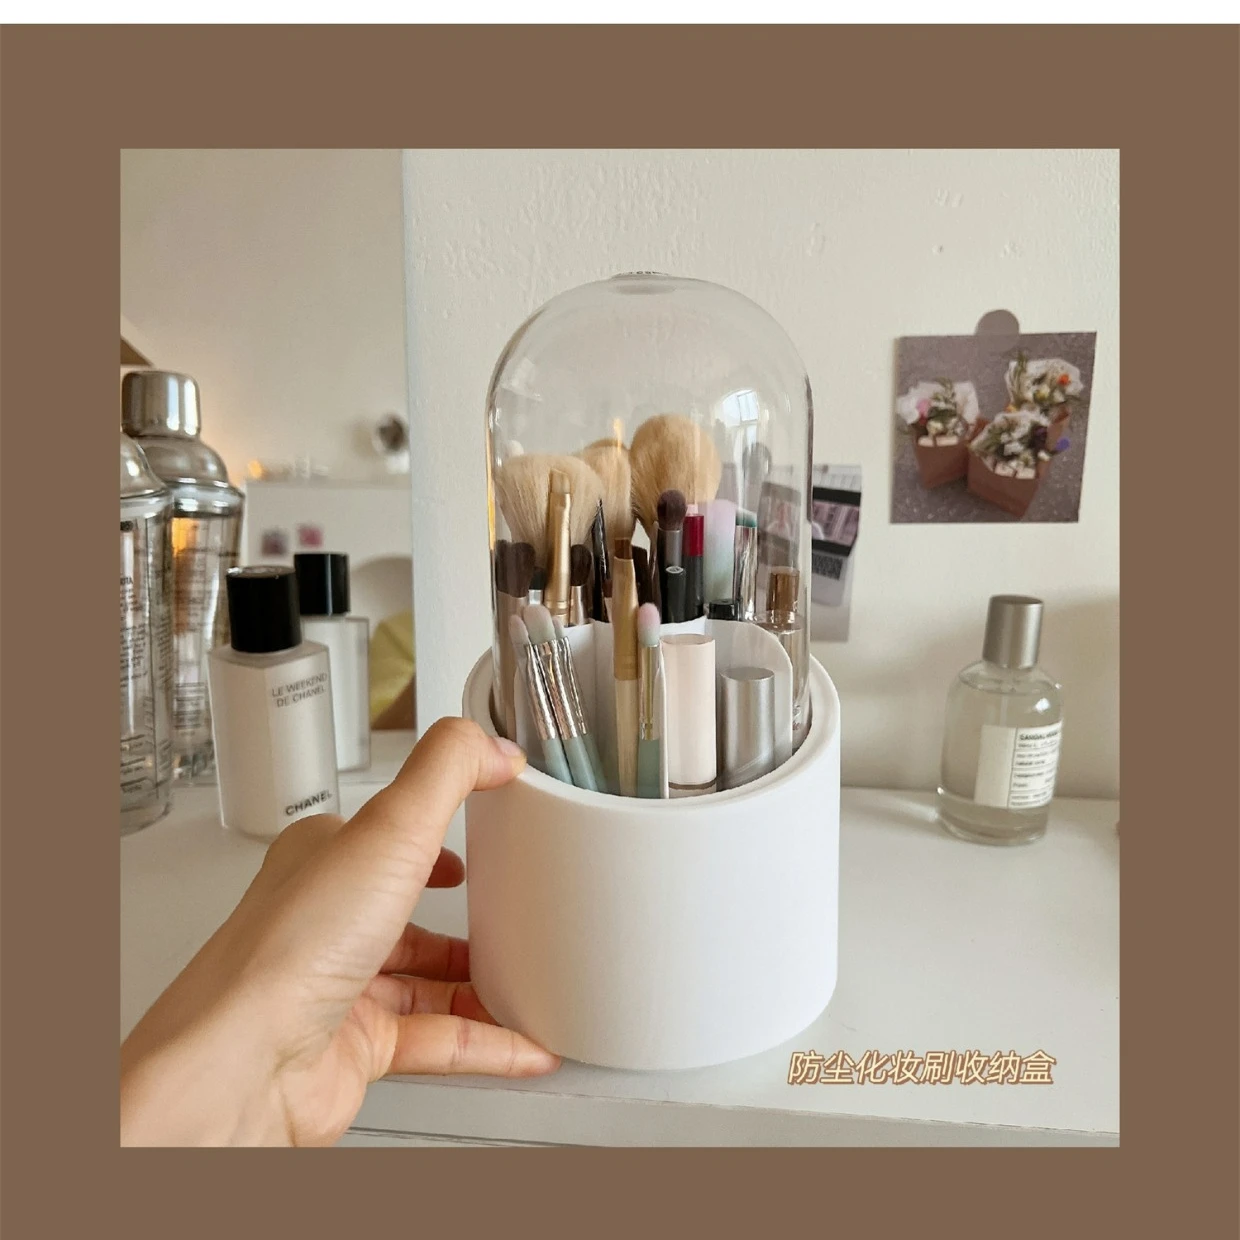 IMENE Makeup Brush Holder with Lid, [𝟐𝟎𝟐𝟑 𝐍𝐞𝐰𝐞𝐬𝐭] 360 Rotating  MakeUp Organizer and Storage with 6 mm Colored Pearls, [Dustproof &  Waterproof] Makeup